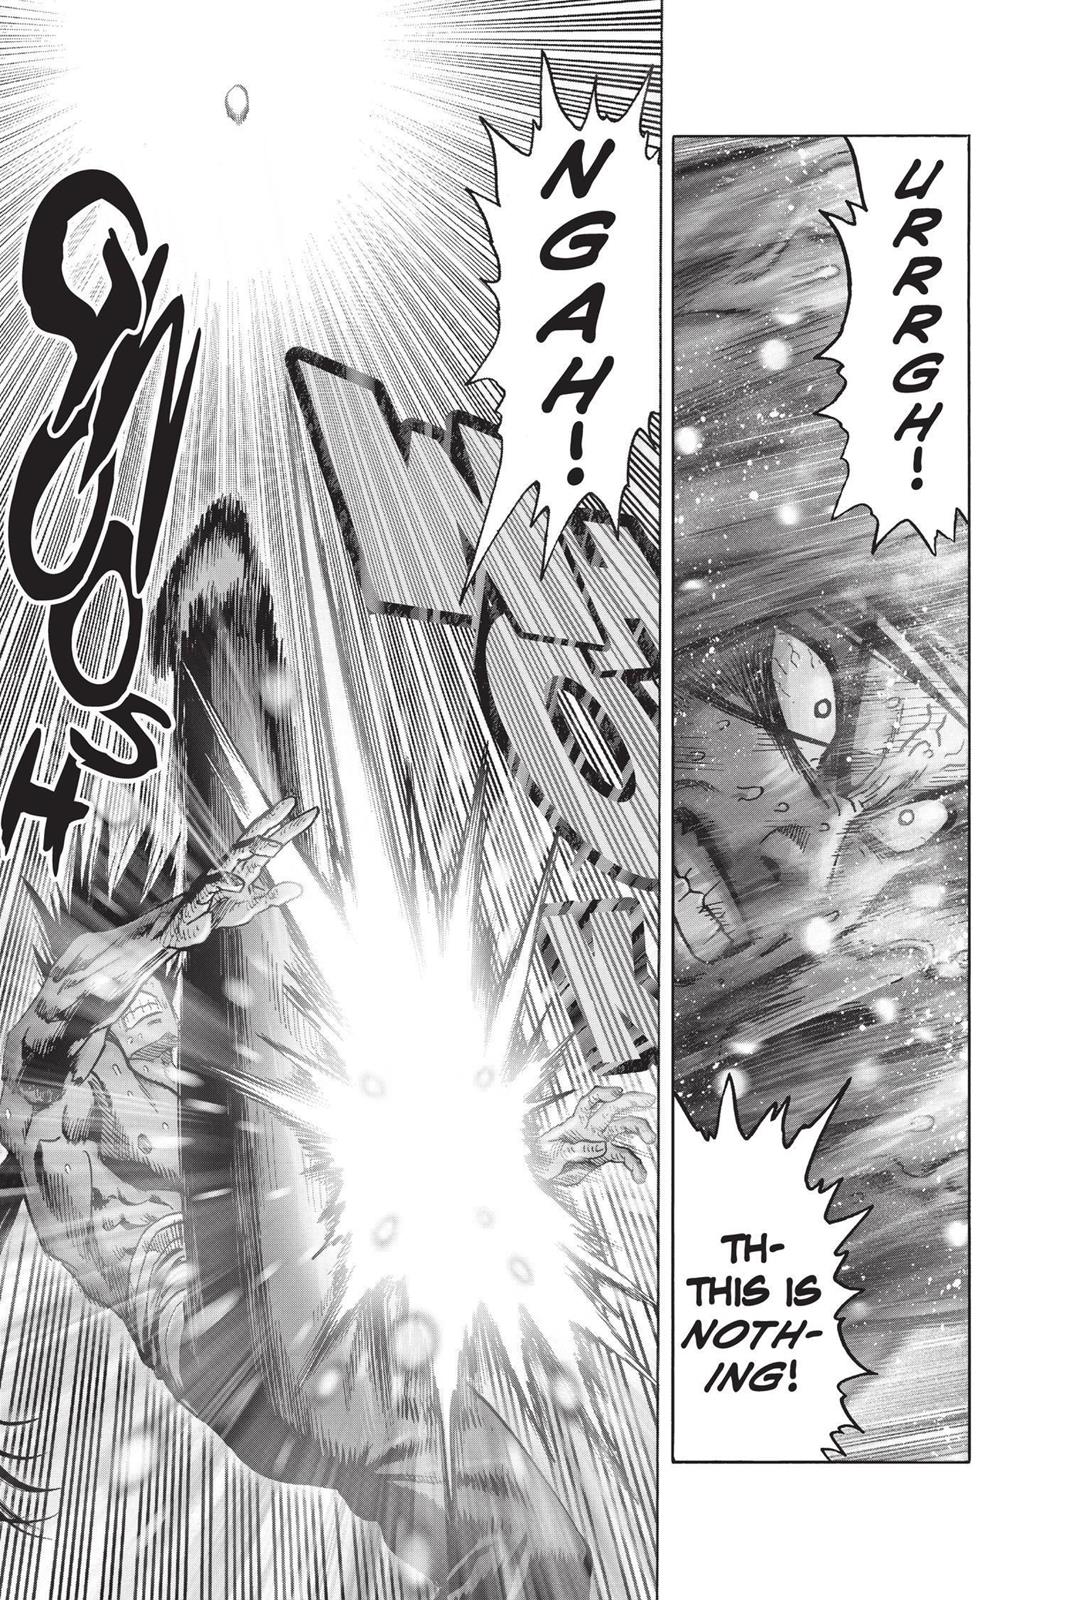 One-Punch Man, Punch 72 image 53